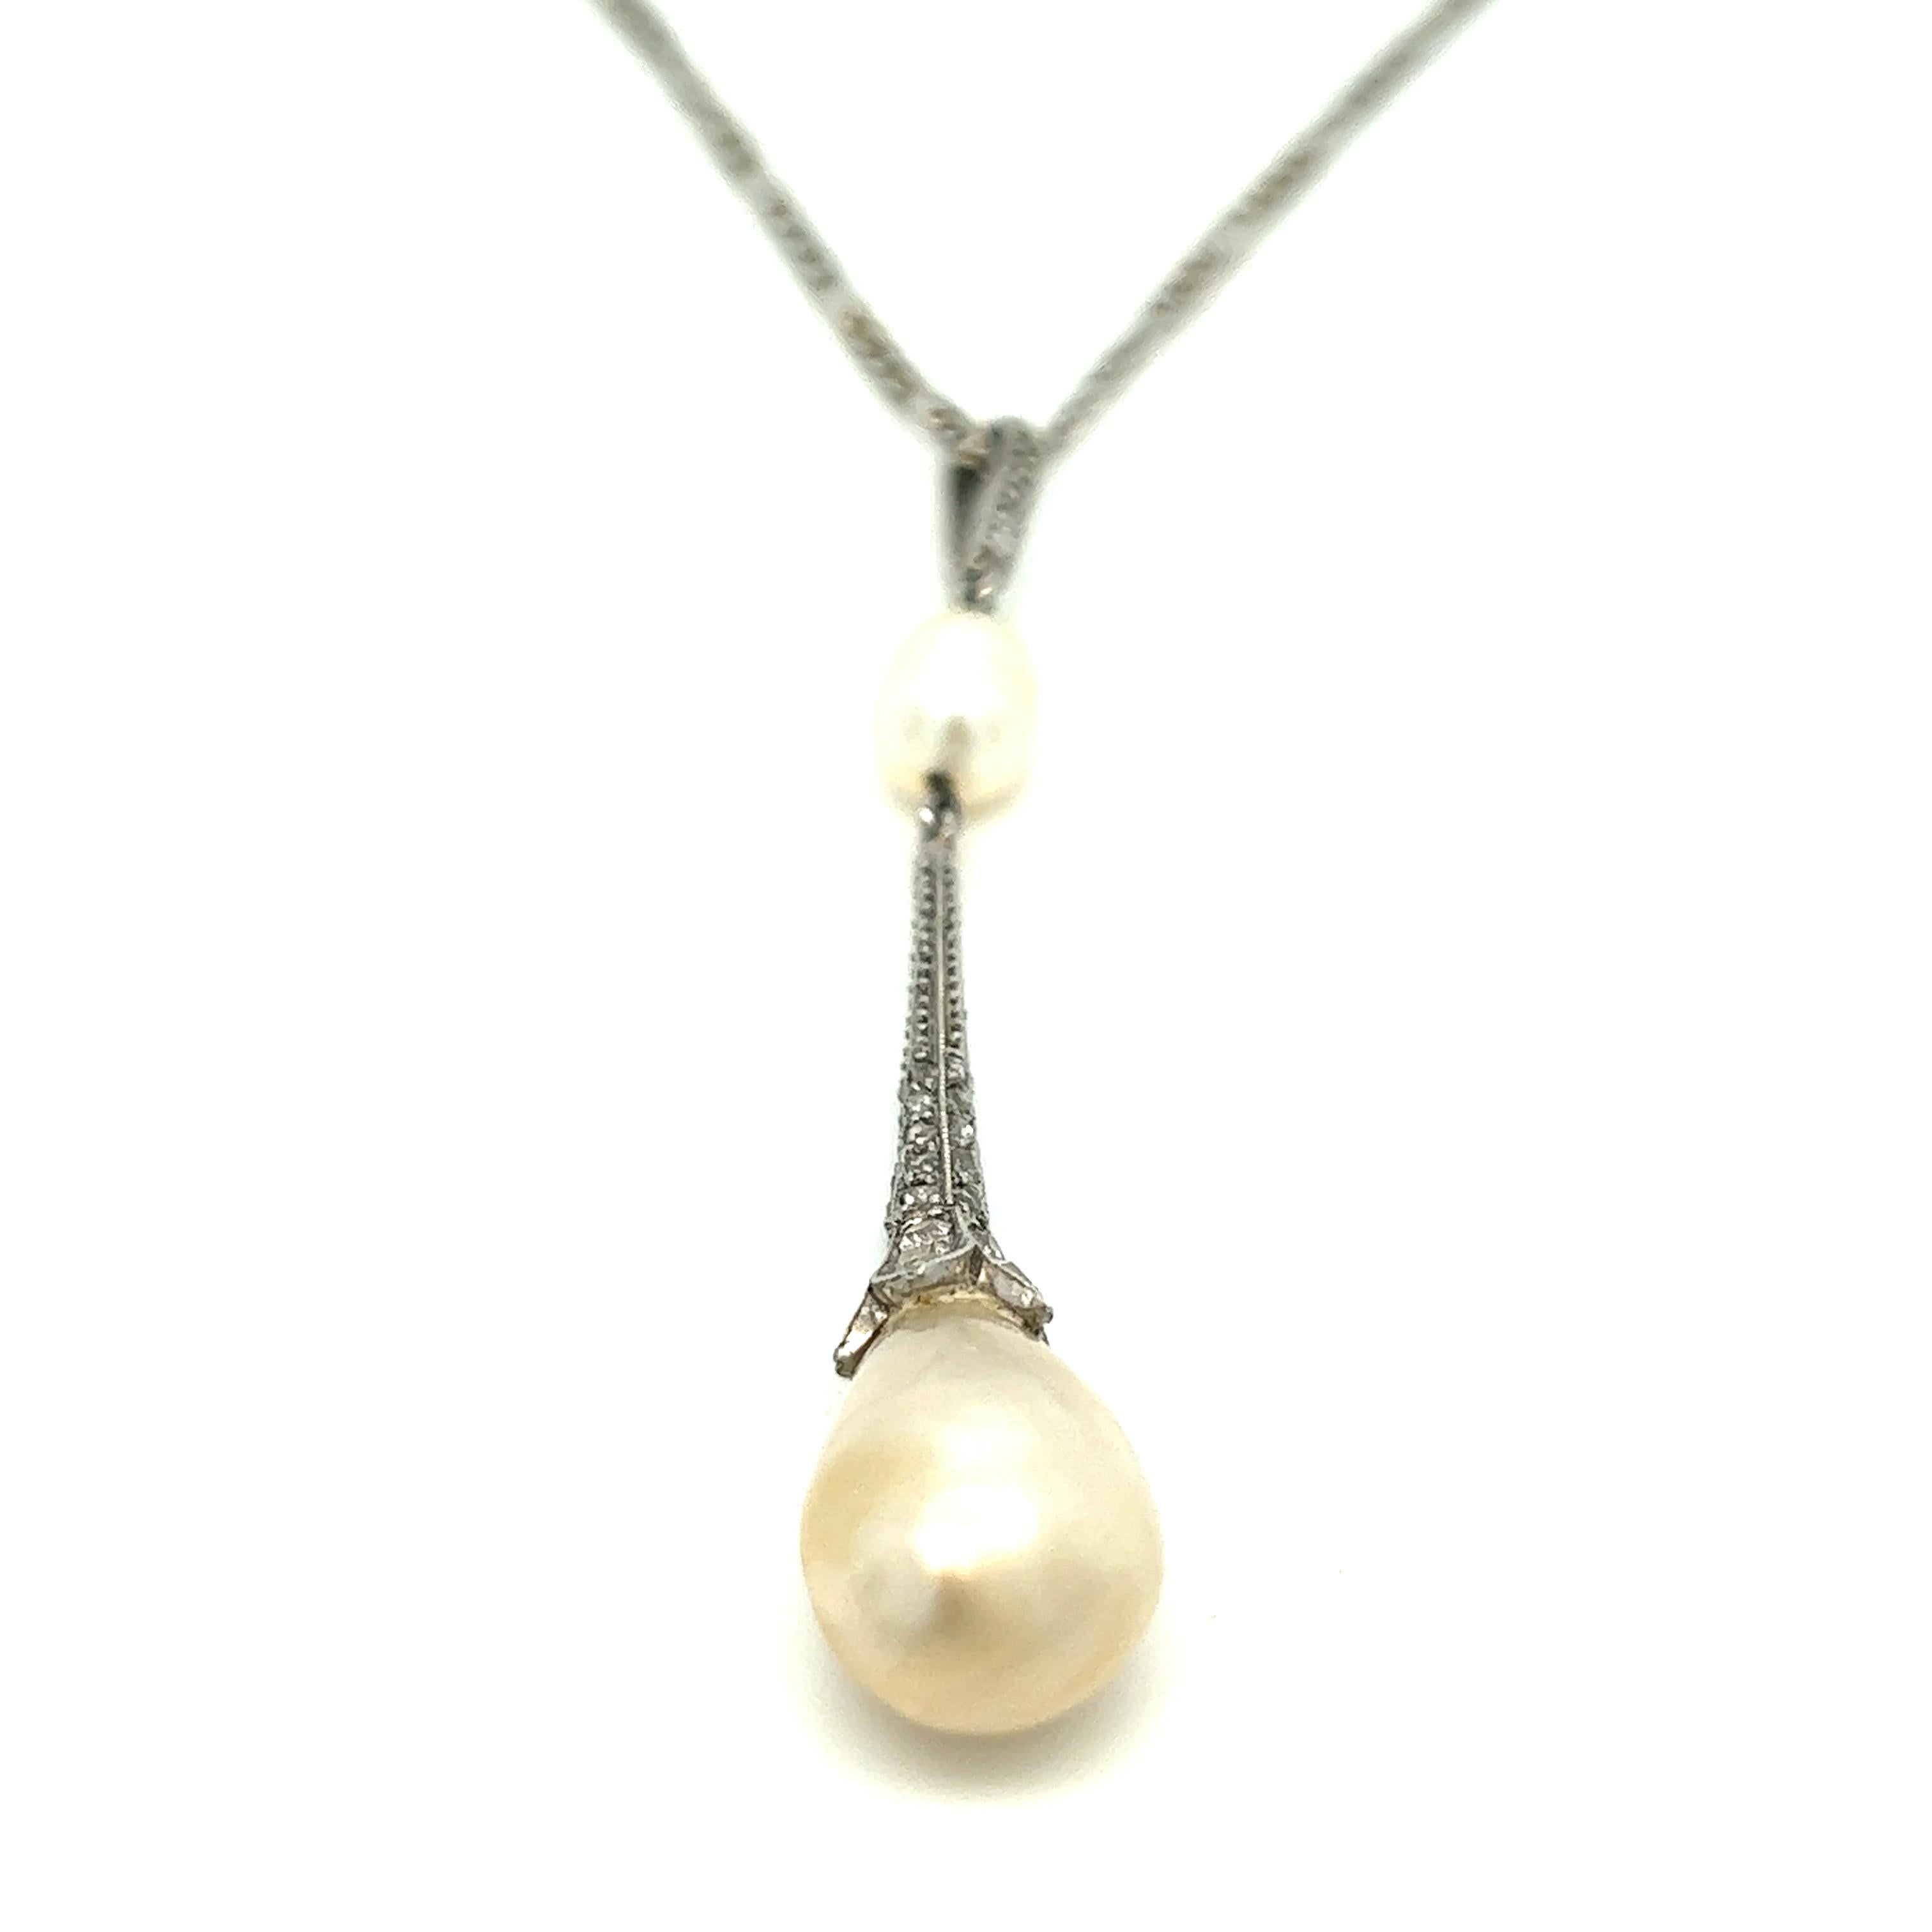 Natural pearls and diamond necklace 

Drop-shaped natural pearl (8.3 - 8.8 mm), oval natural pearl, rose-cut diamonds; French import assay mark for platinum

Size: width 8.8 mm (main pearl), chain length 14 inches
Total weight: 5.9